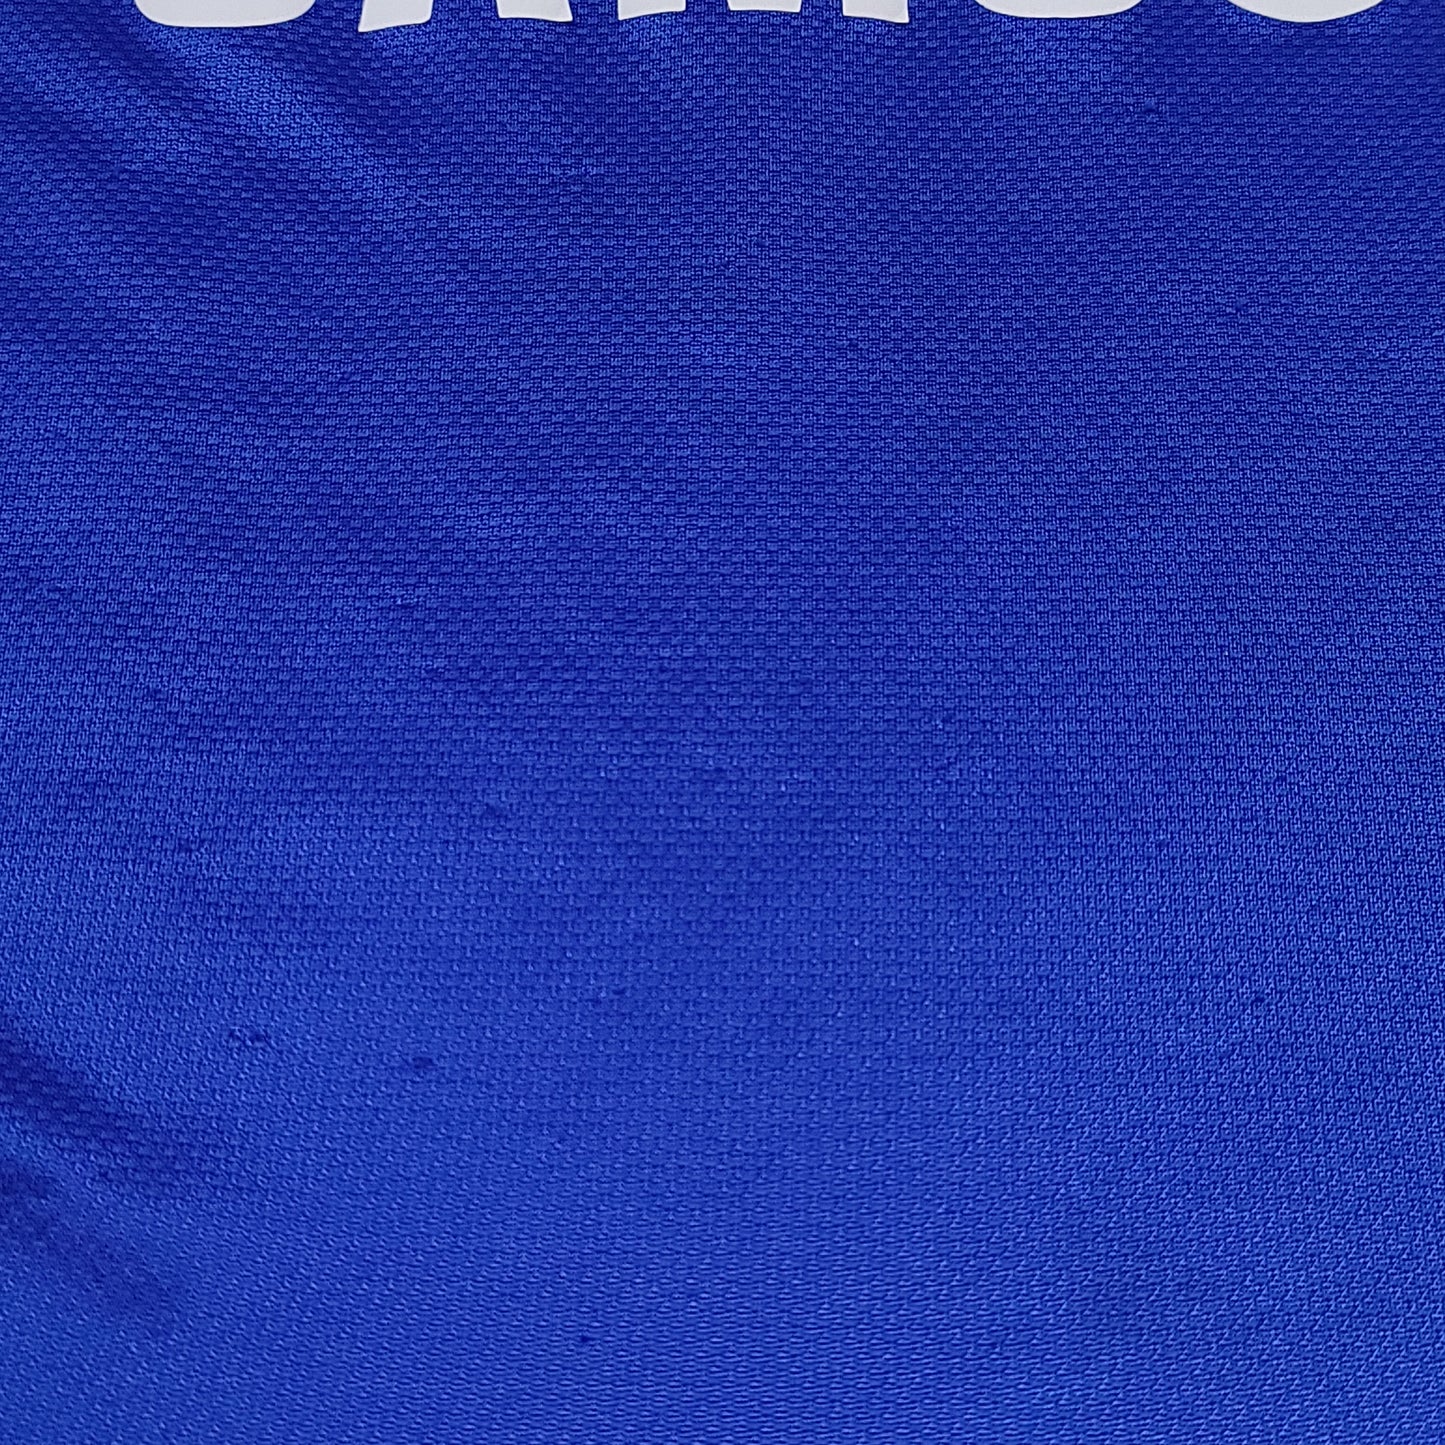 Chelsea Blue adidas 2008-09 Youth Soccer Jersey